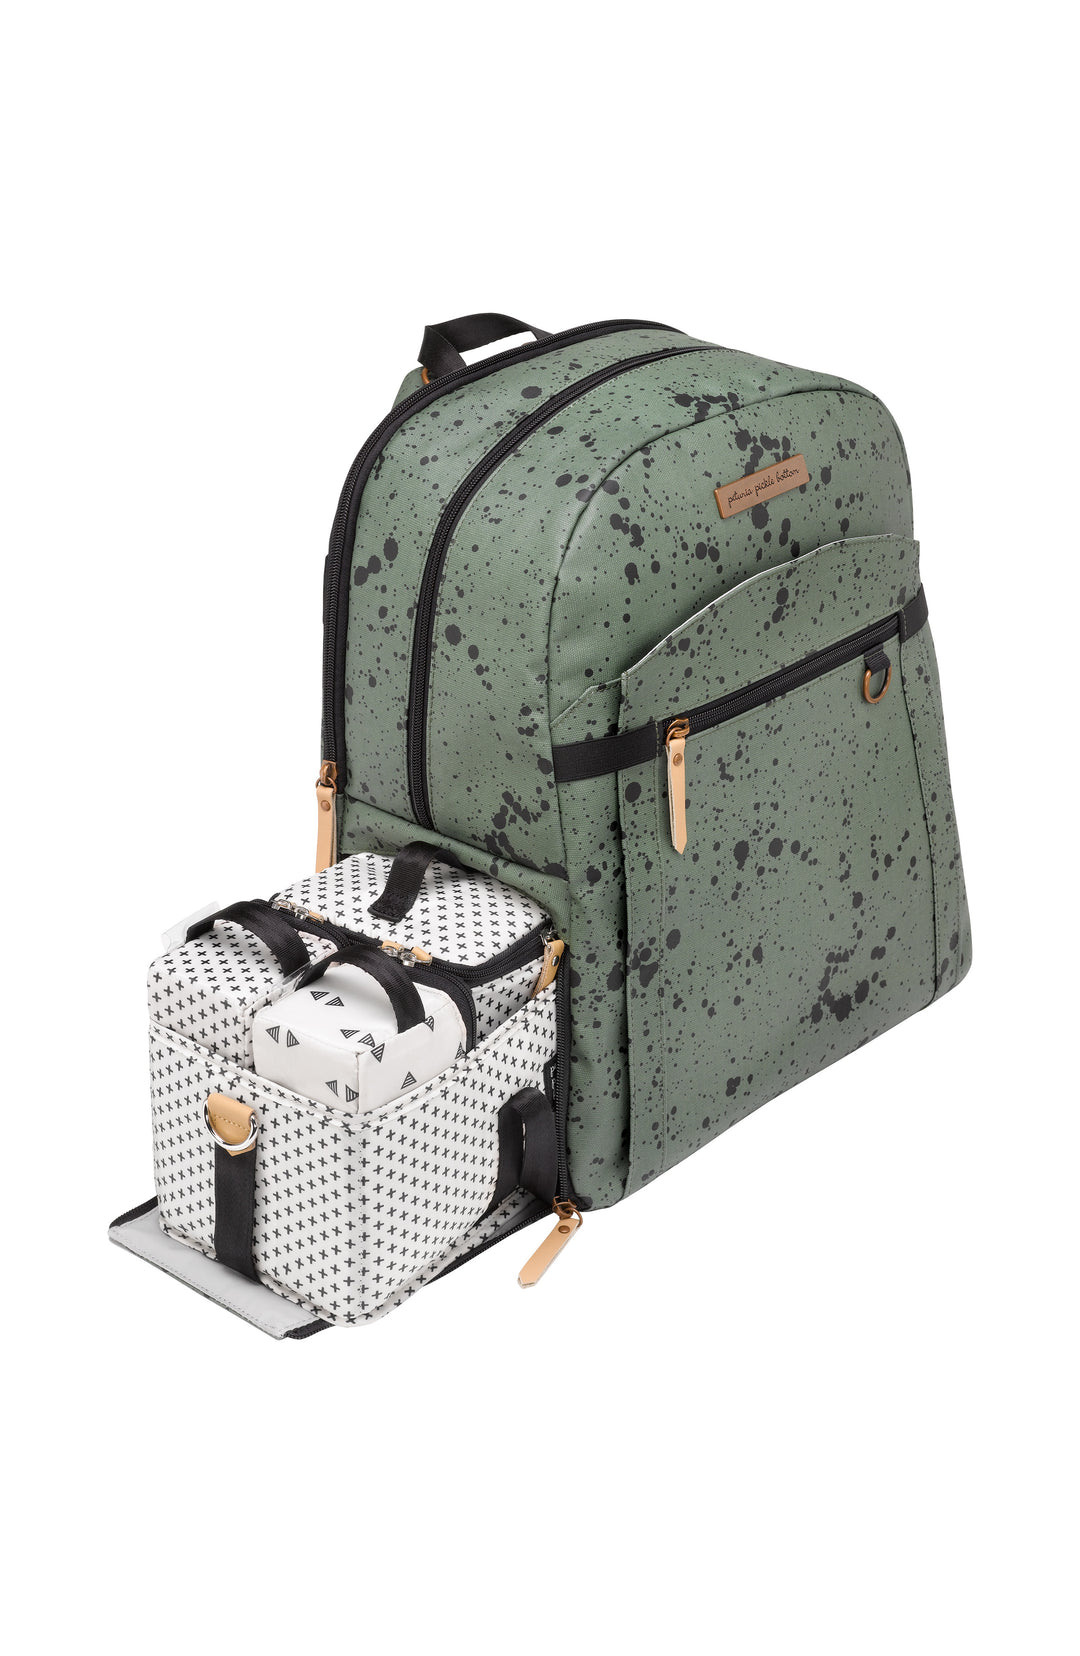 2-in-1 Provisions Backpack - Olive Ink Blot – Petunia Pickle